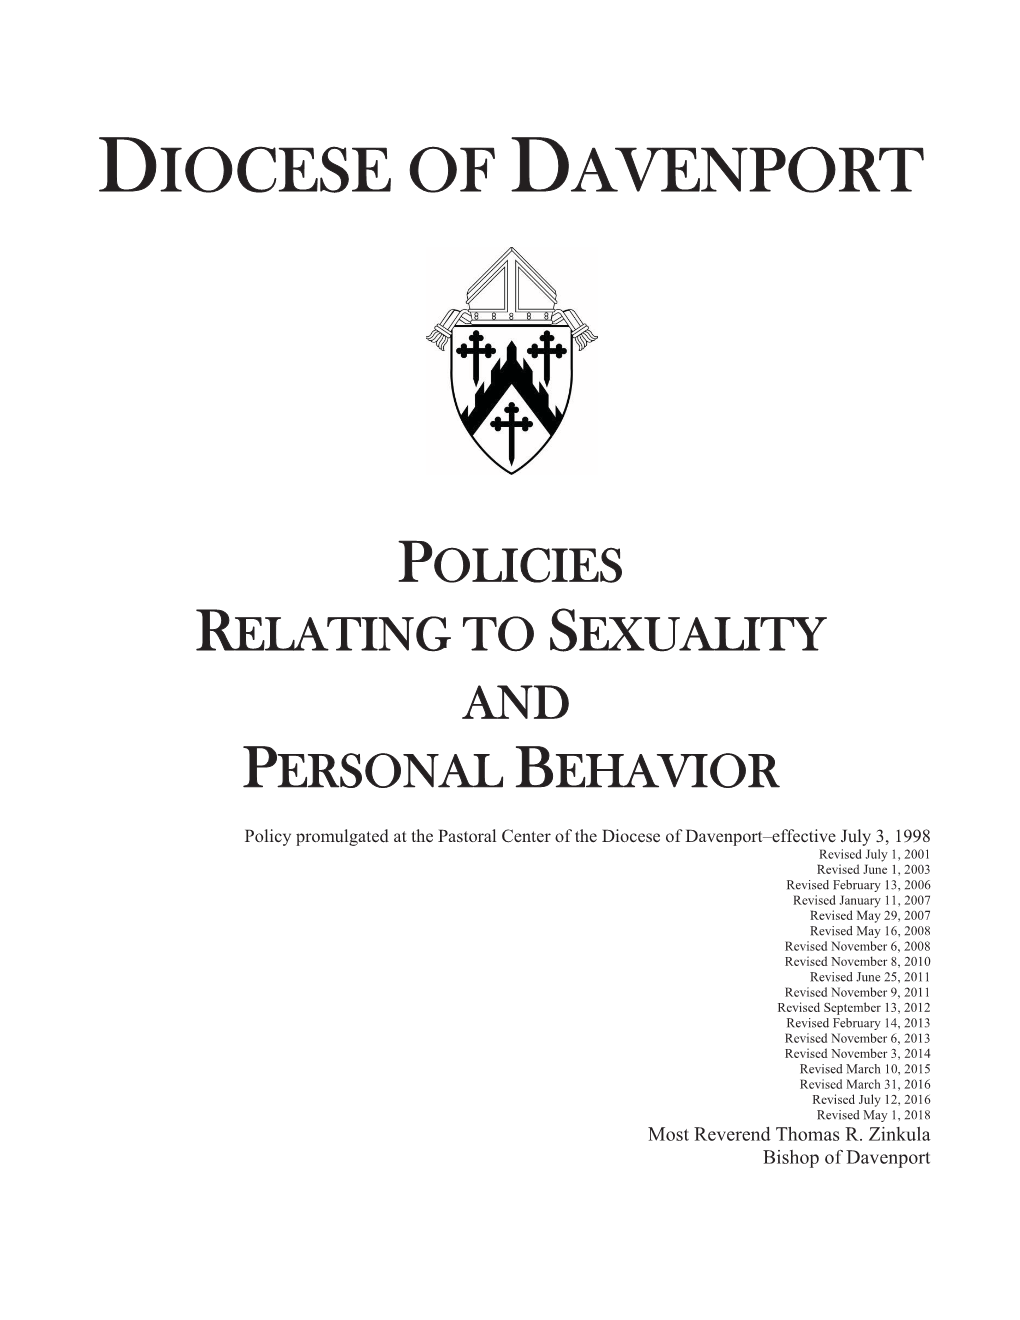 Diocesan Policies Relating to Sexuality and Personal Behavior